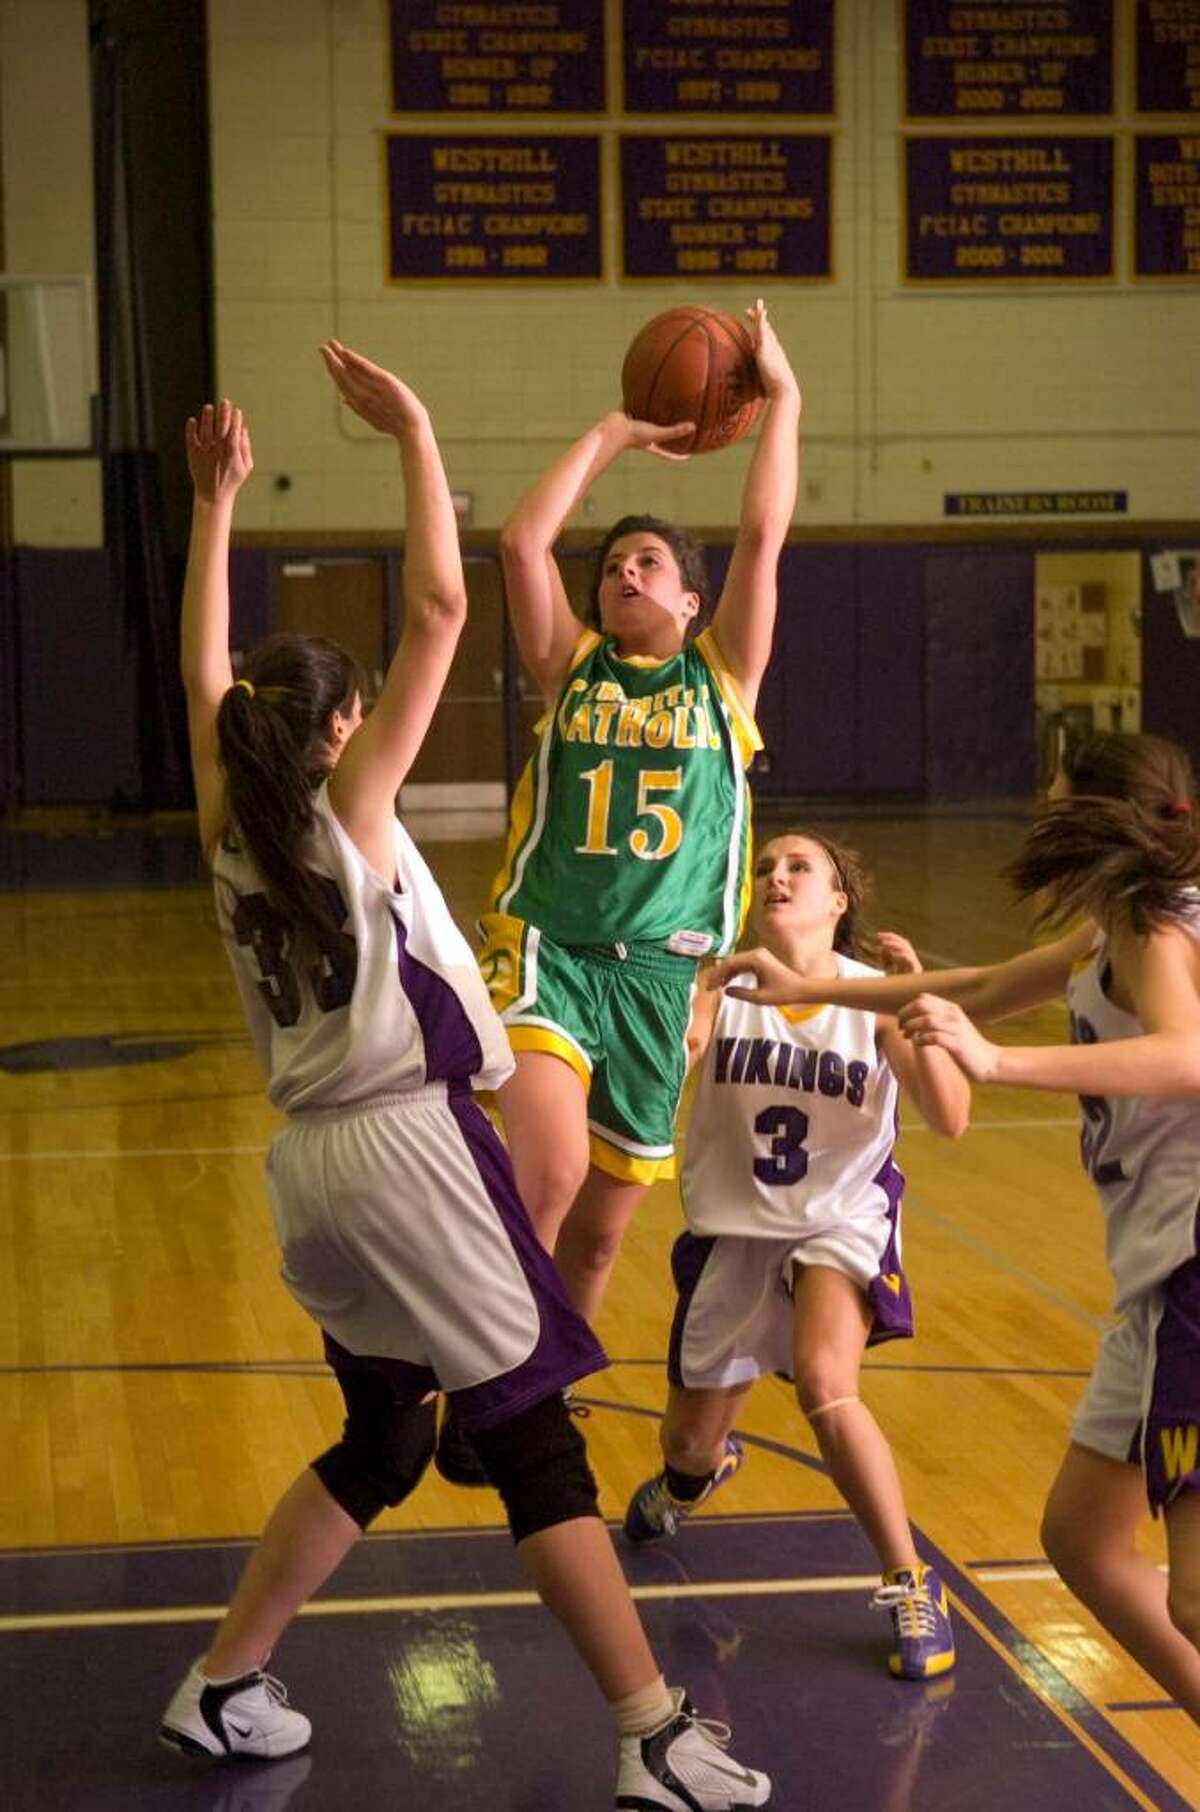 Trinity's Erin Sottosanti center, shoots during and FCIAC girls basketball game at Westhill High School in Stamford, Conn. on Tuesday, Jan. 12, 2010.